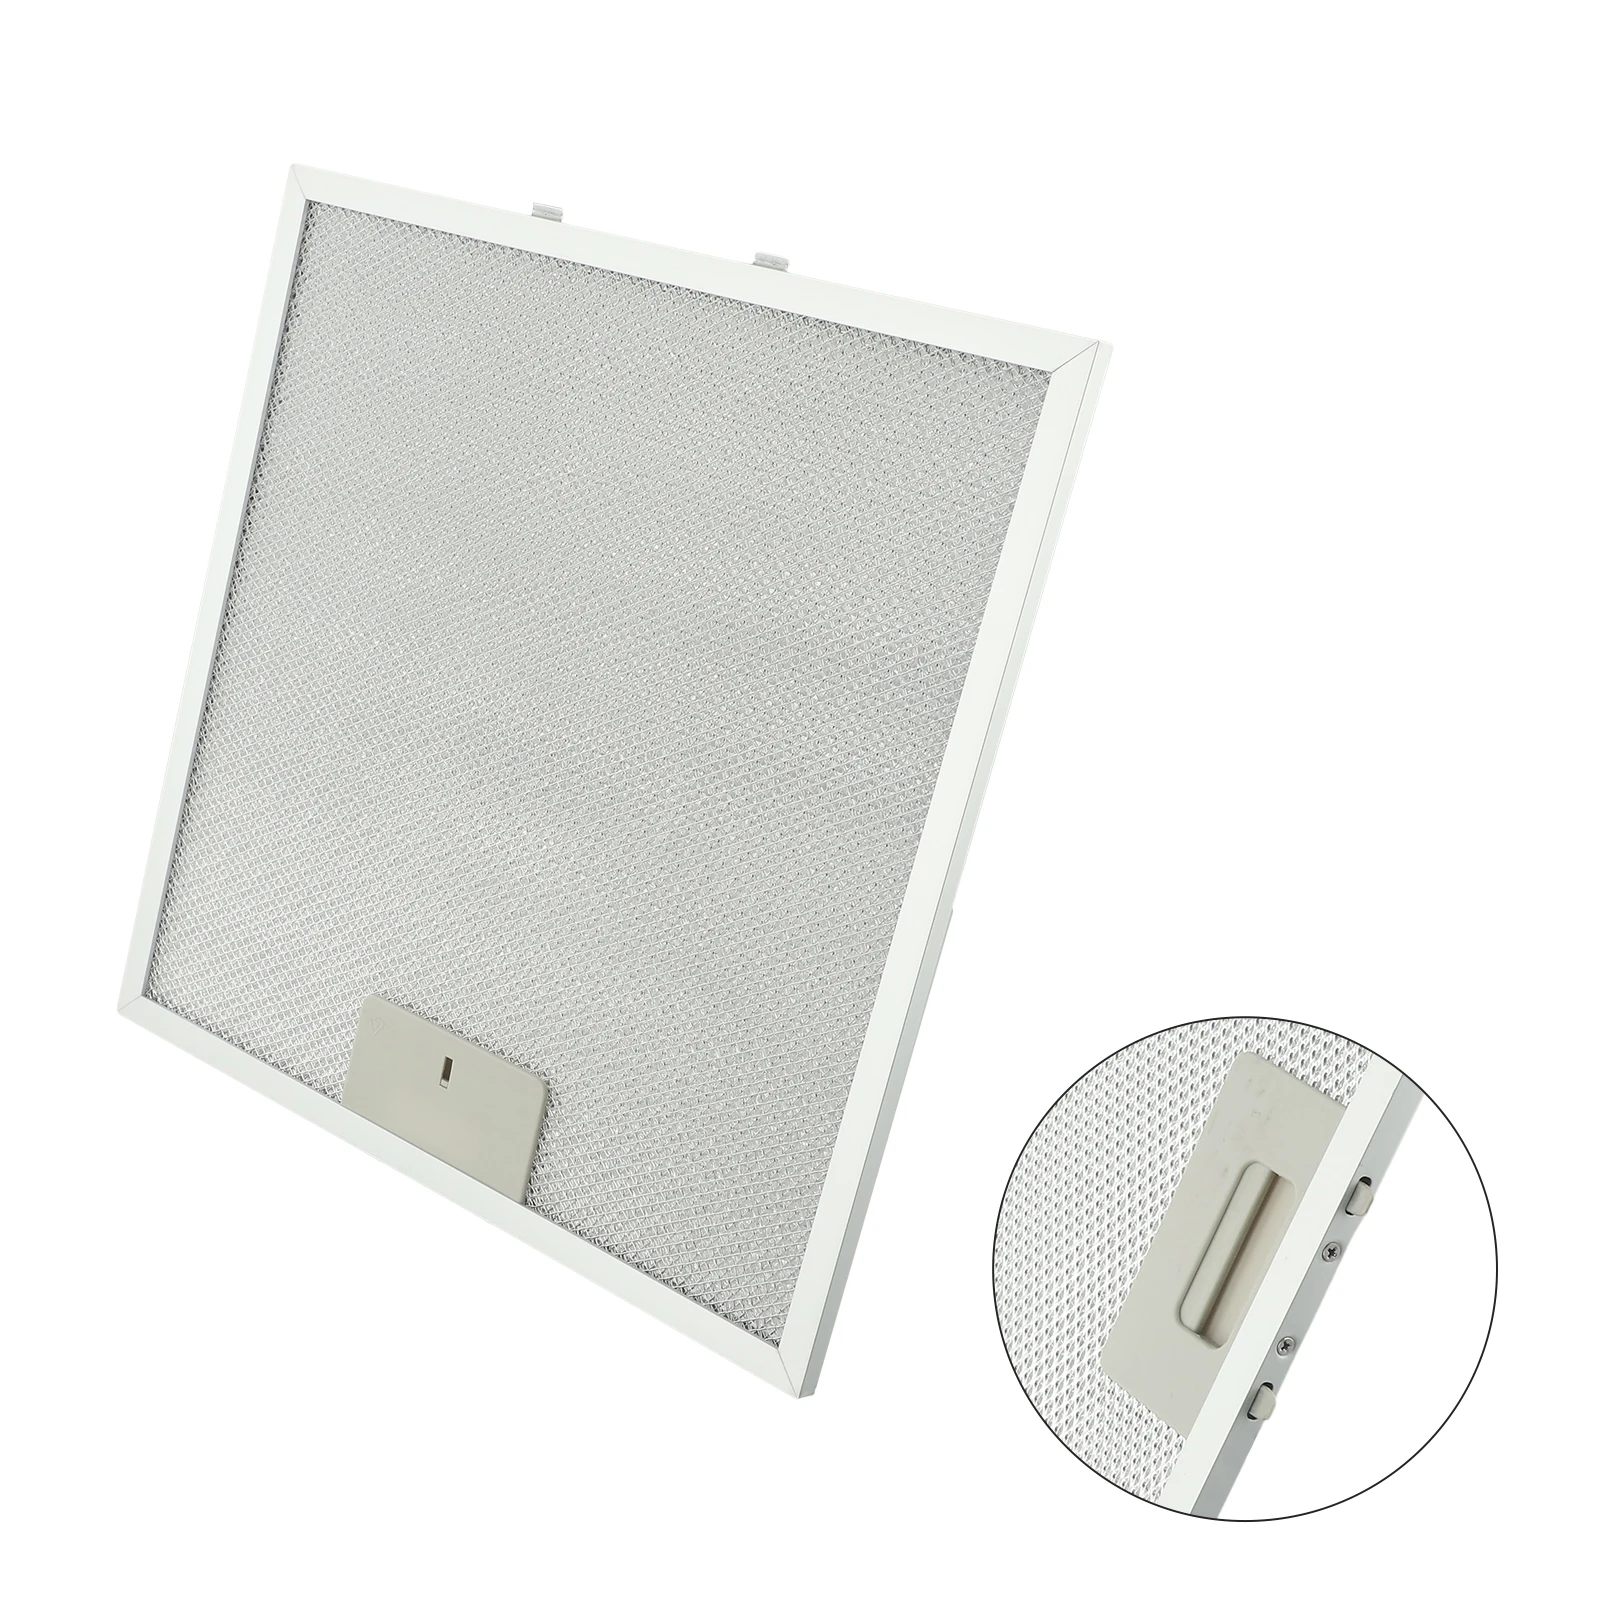 

Hood Filter Fits Filter None Mesh Extractor Metal Old Range Silver Stainless Steel Vent Filter 1PCS Cooker None